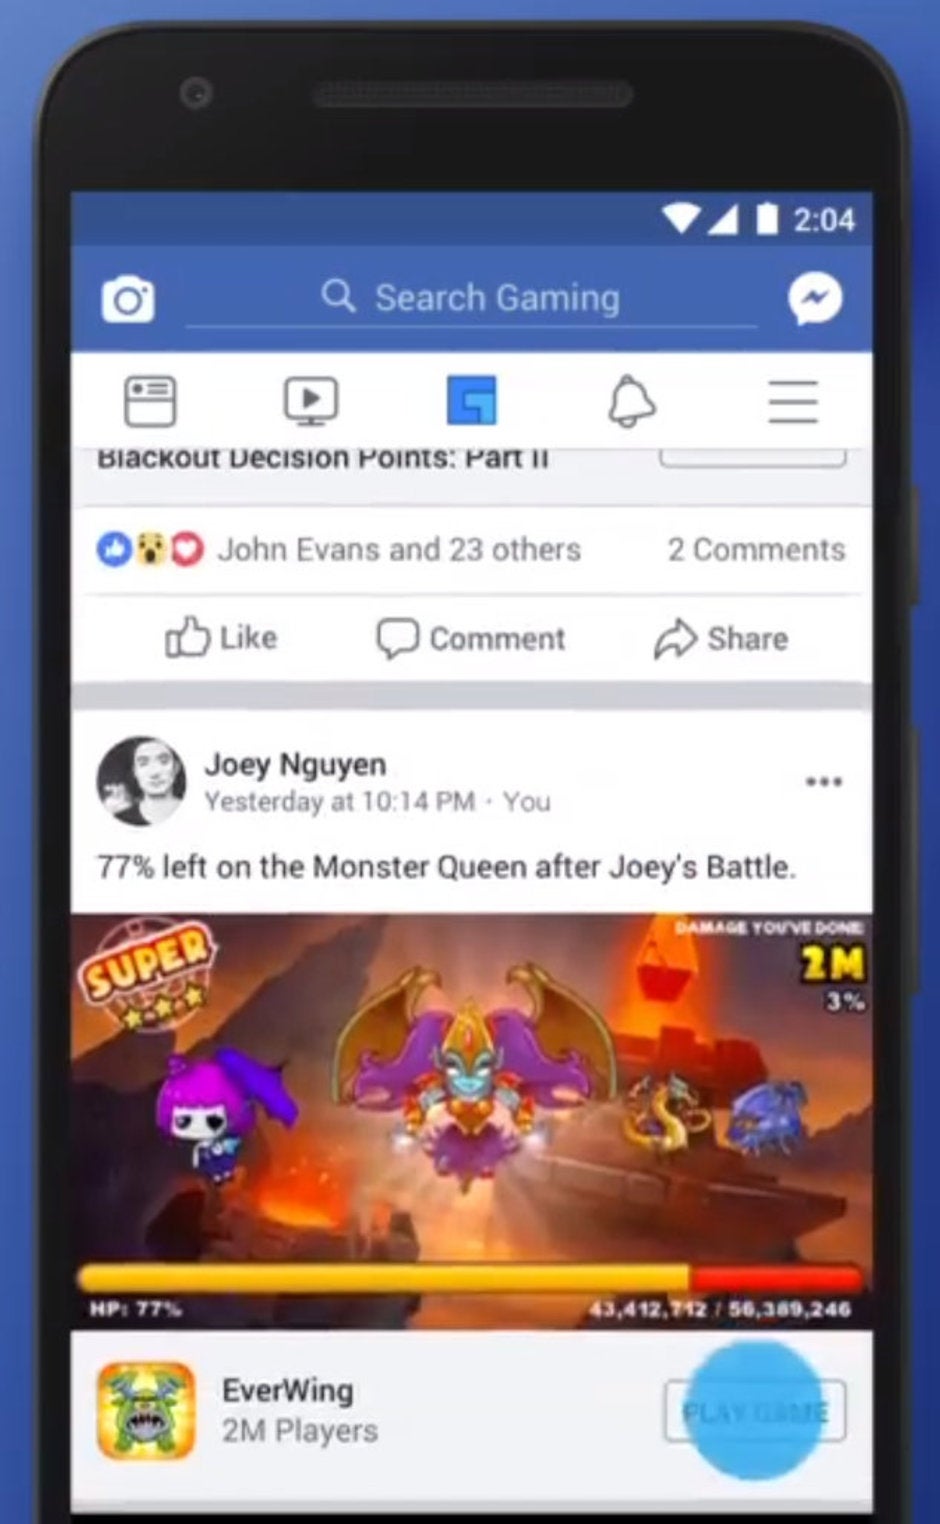 Facebook bets big on entertainment, adds new tab on its mobile app